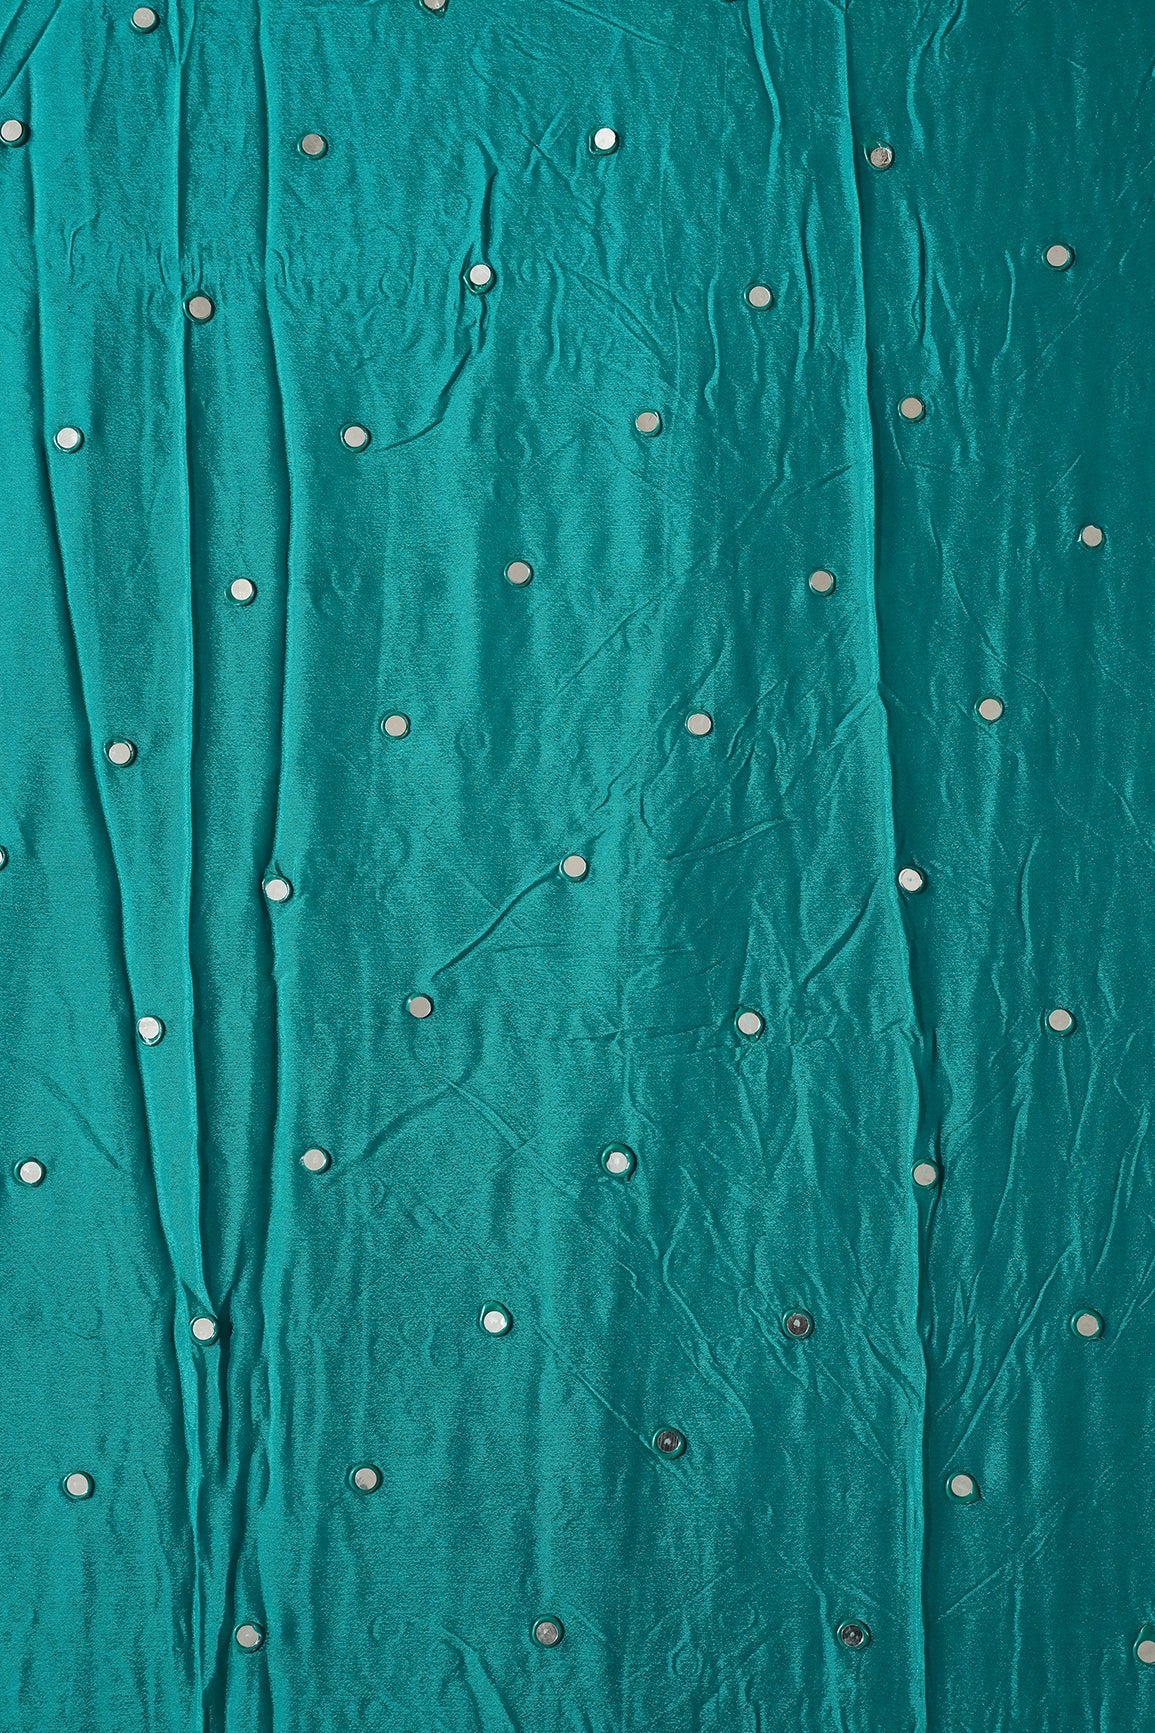 3.75 Meter Cut Piece Of Real Mirror Embroidery Work On Dark Turquoise Viscose Chinnon Chiffon Fabric - doeraa